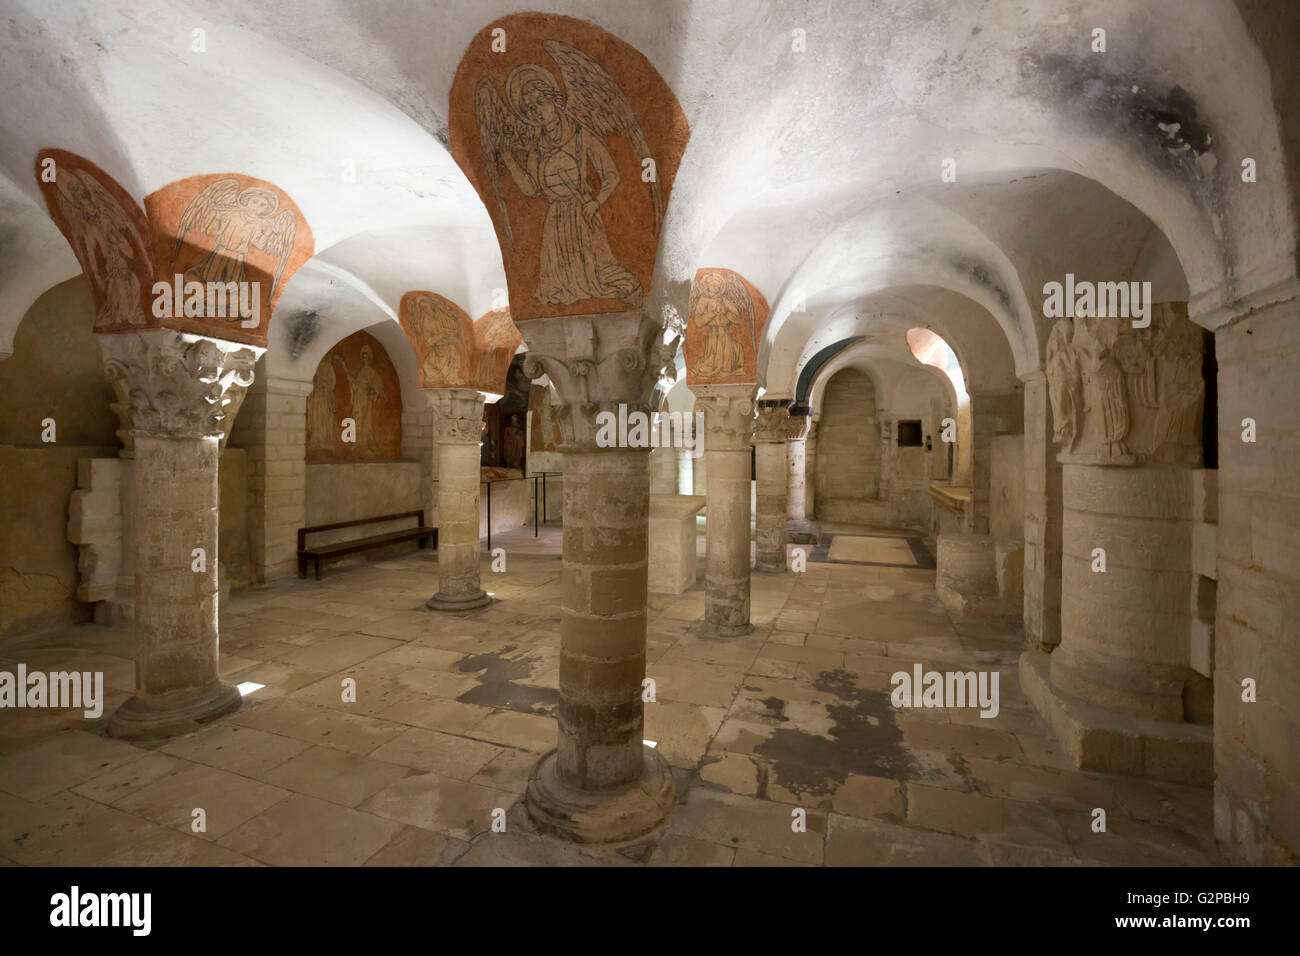 Crypt with 15th century frescoes of angel musicians, Notre-Dame cathedral, Bayeux, Normandy, France, Europe Stock Photo